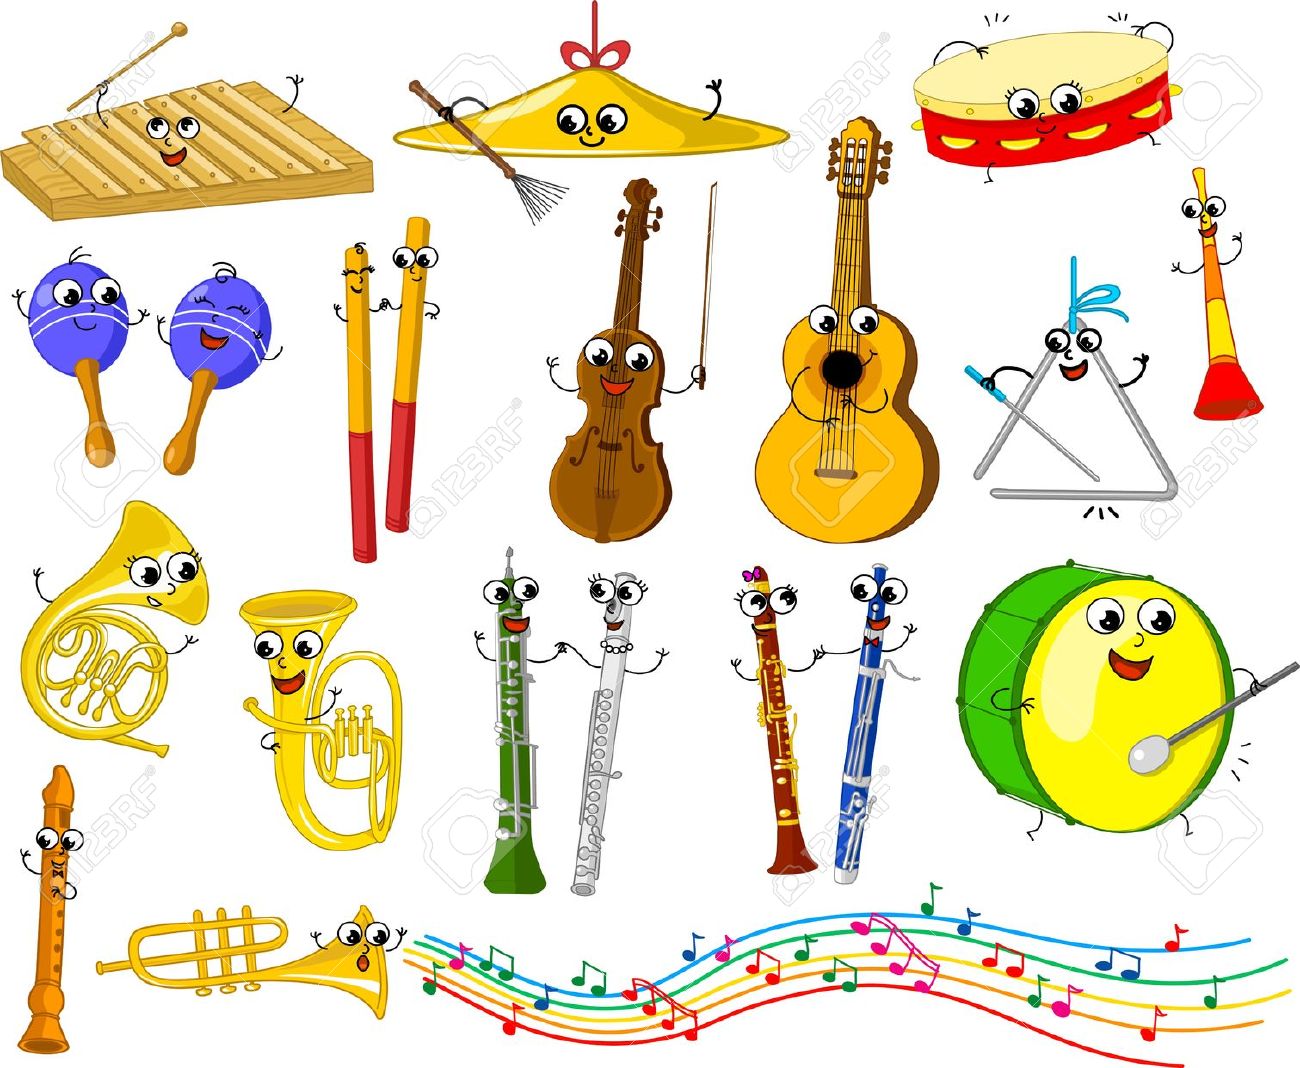 musical instruments for kids clipart - Clipground